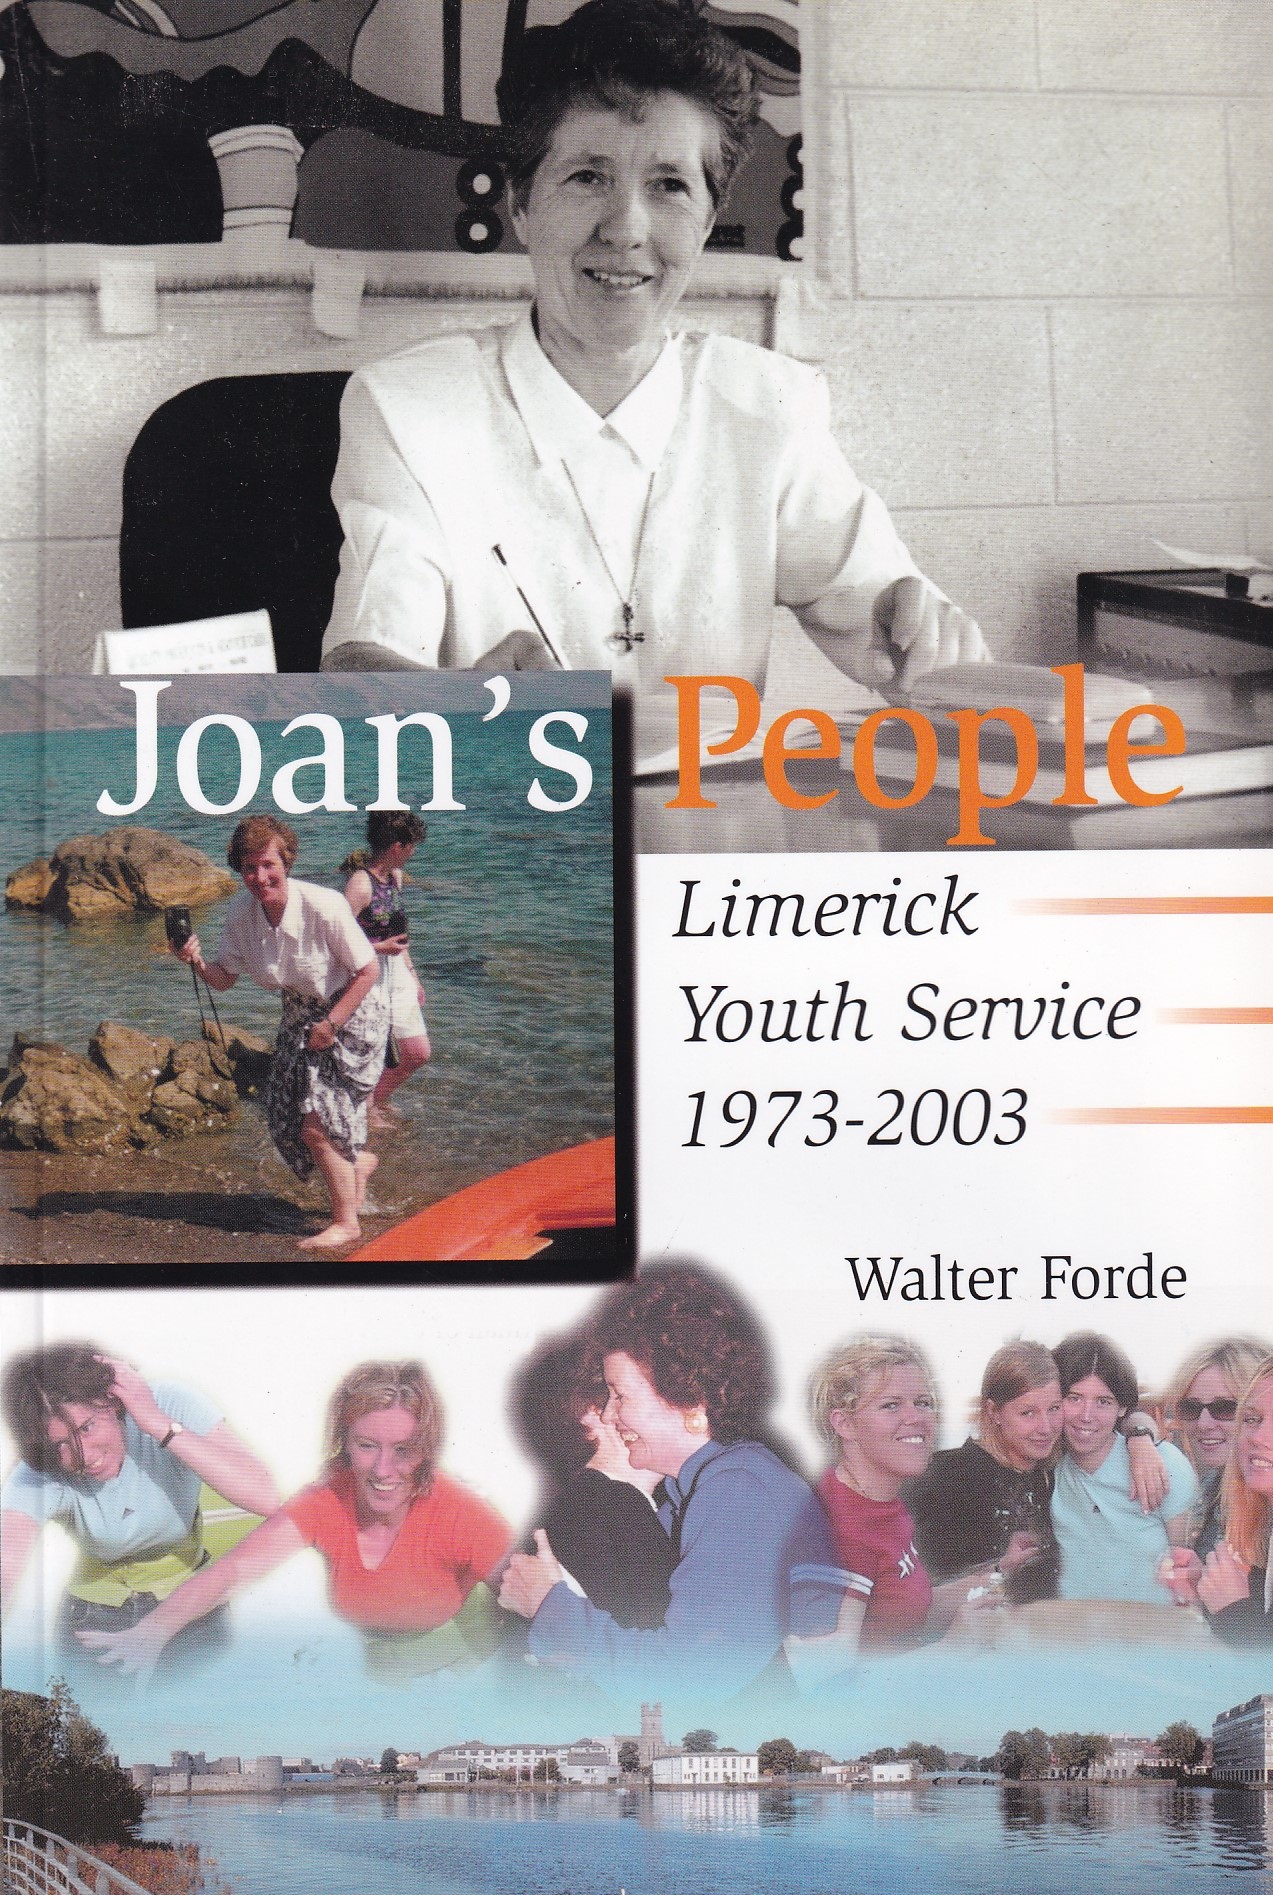 Joan’s People: Limerick Youth Service, 1973-2003 by Walter Forde